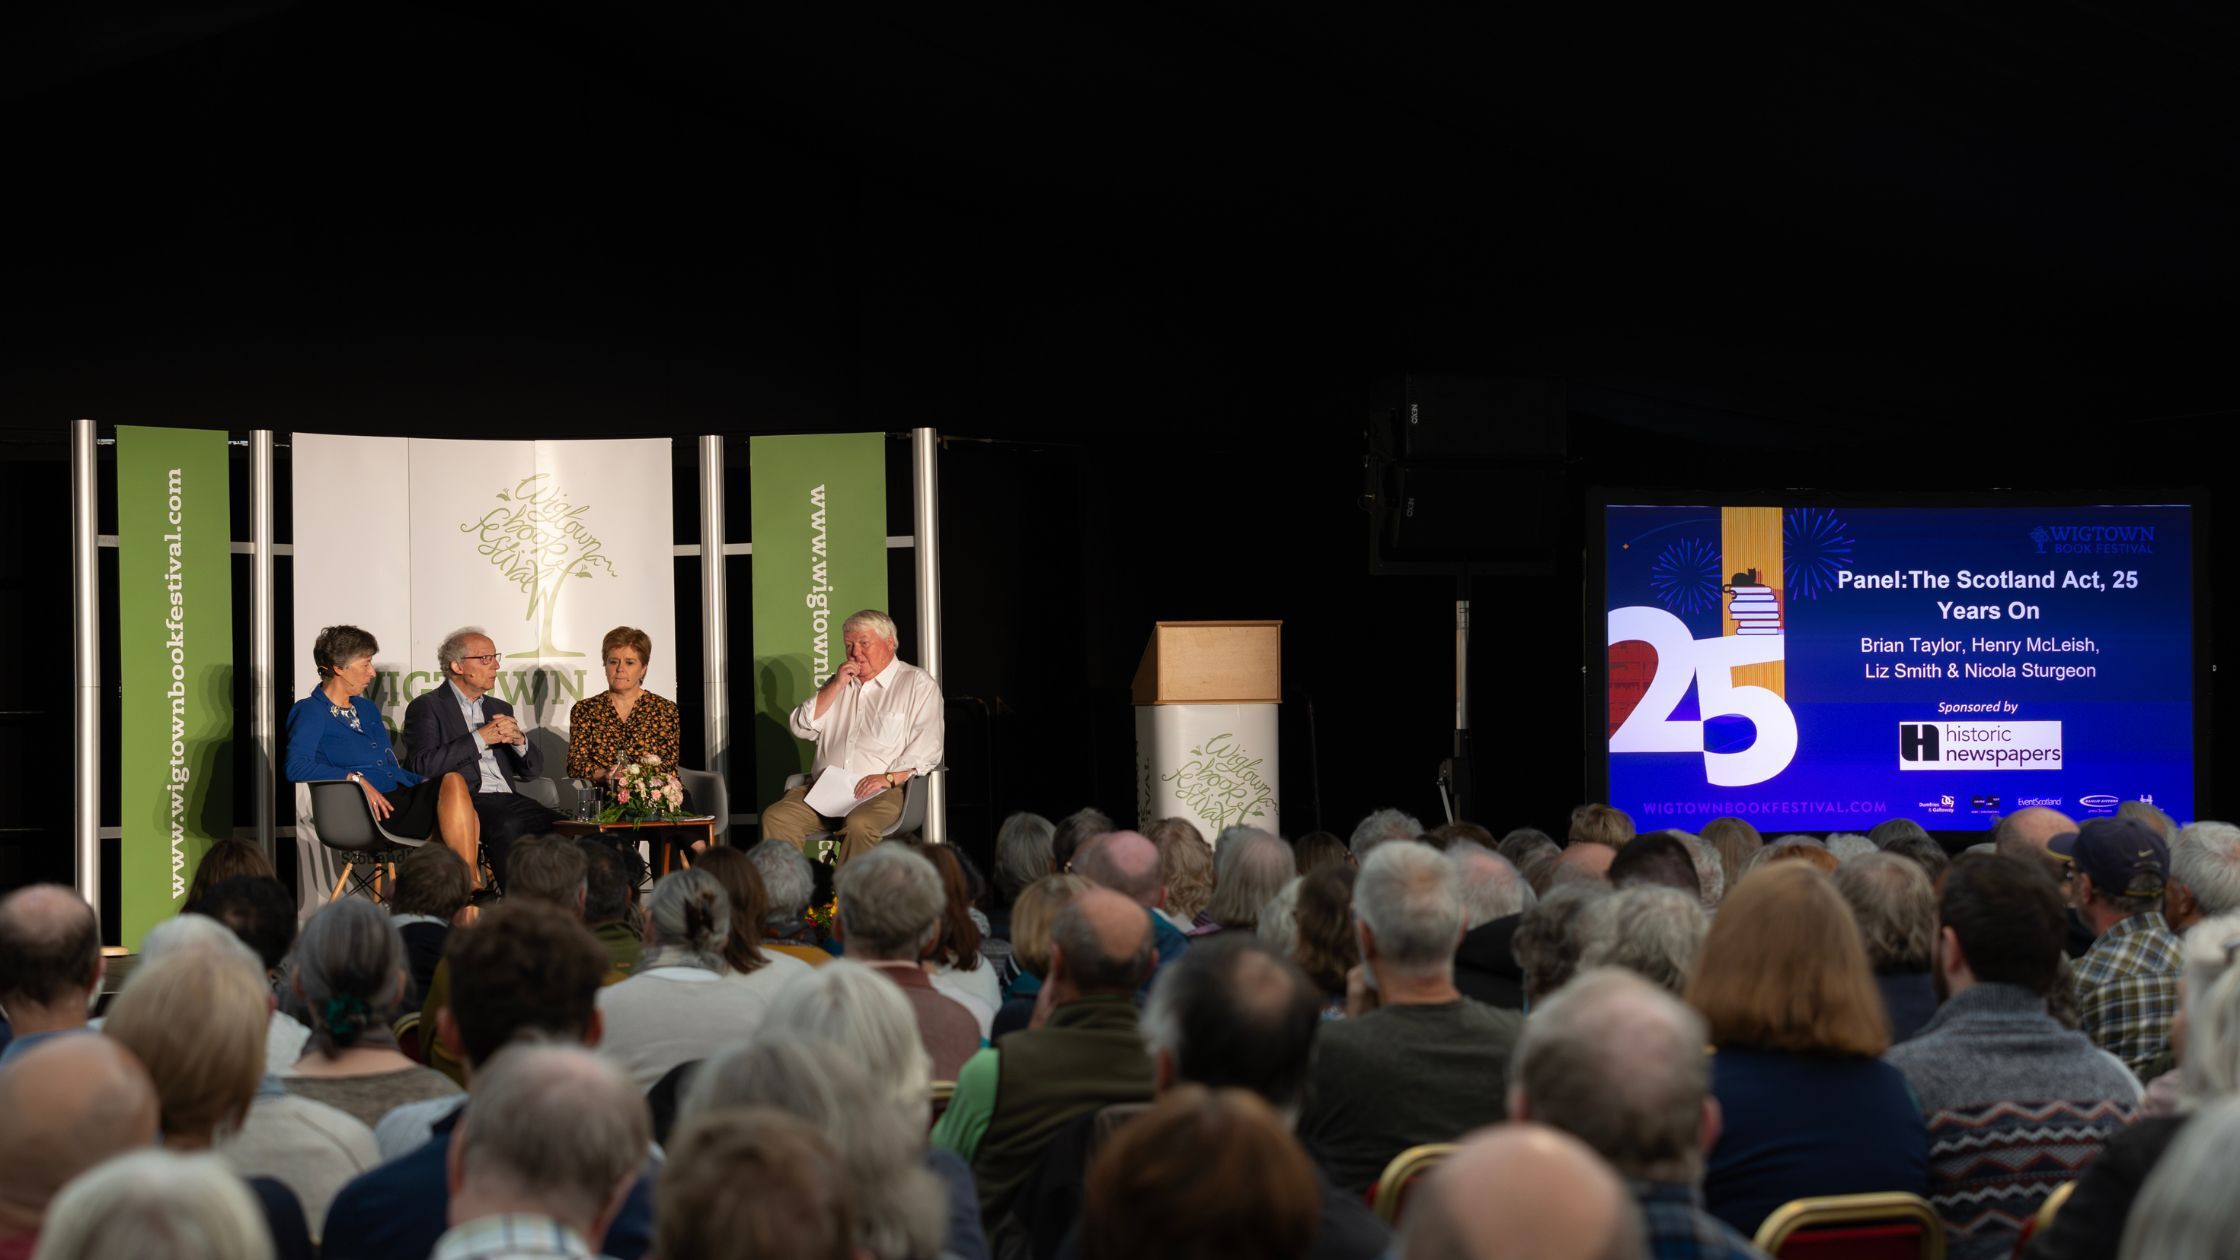 Left to right: Liz Smith, Henry McLeish, Nicola Sturgeon and Brian Taylor on stage at Wigtown Book Festival, with audience in foreground.